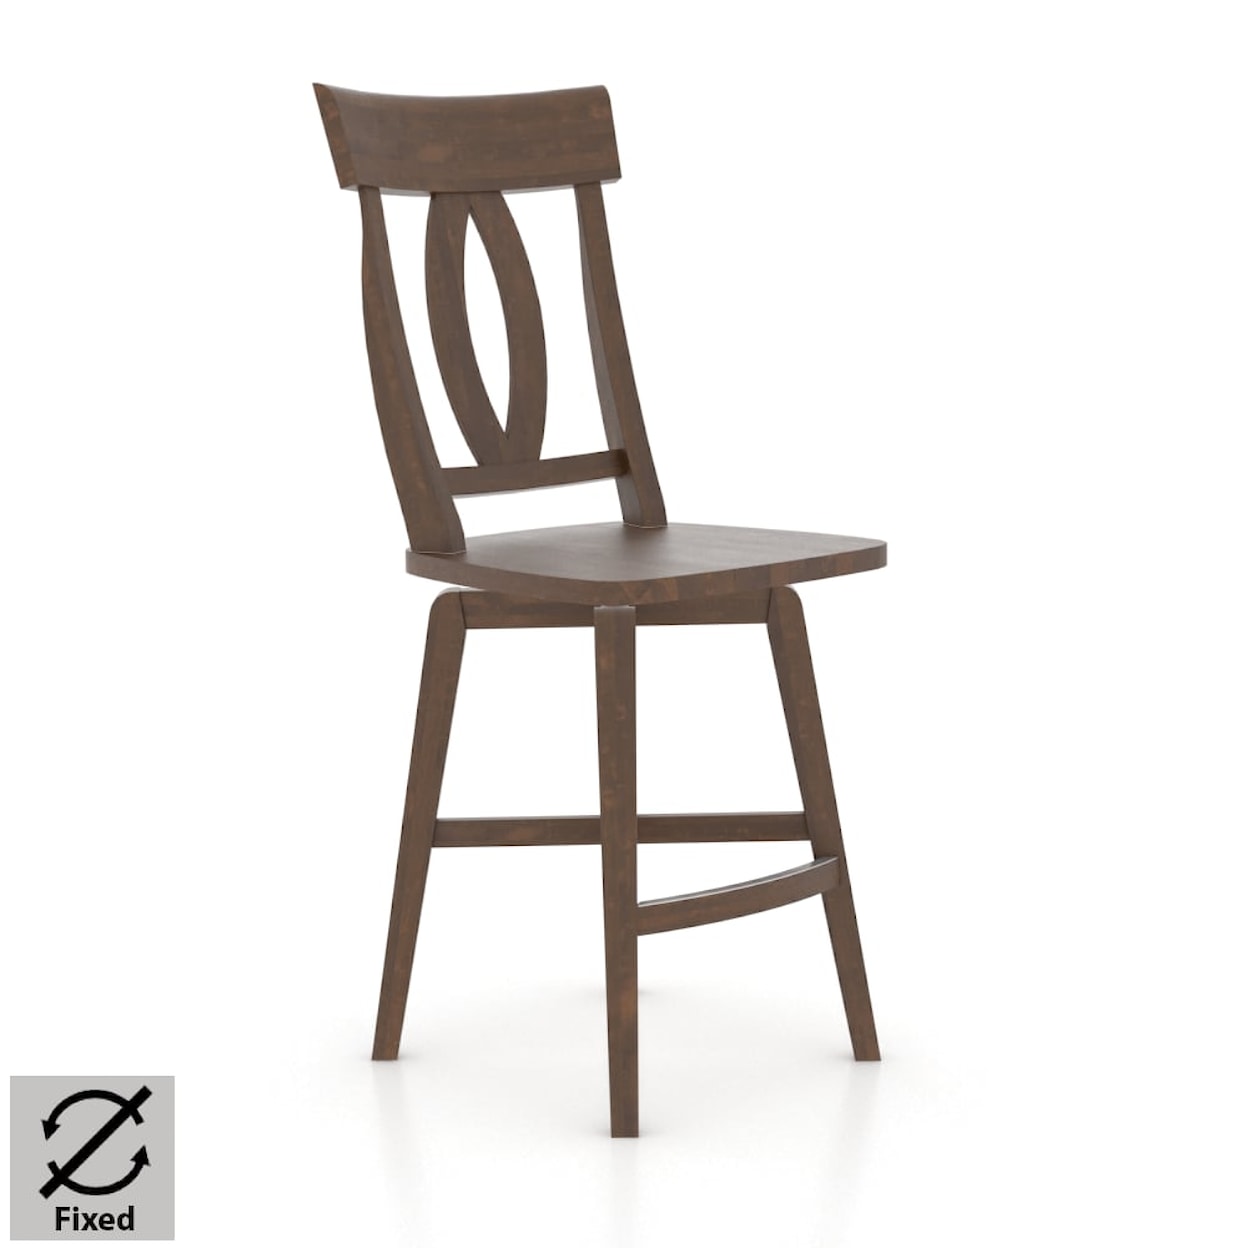 Canadel Canadel Customizable Fixed Counter Stool